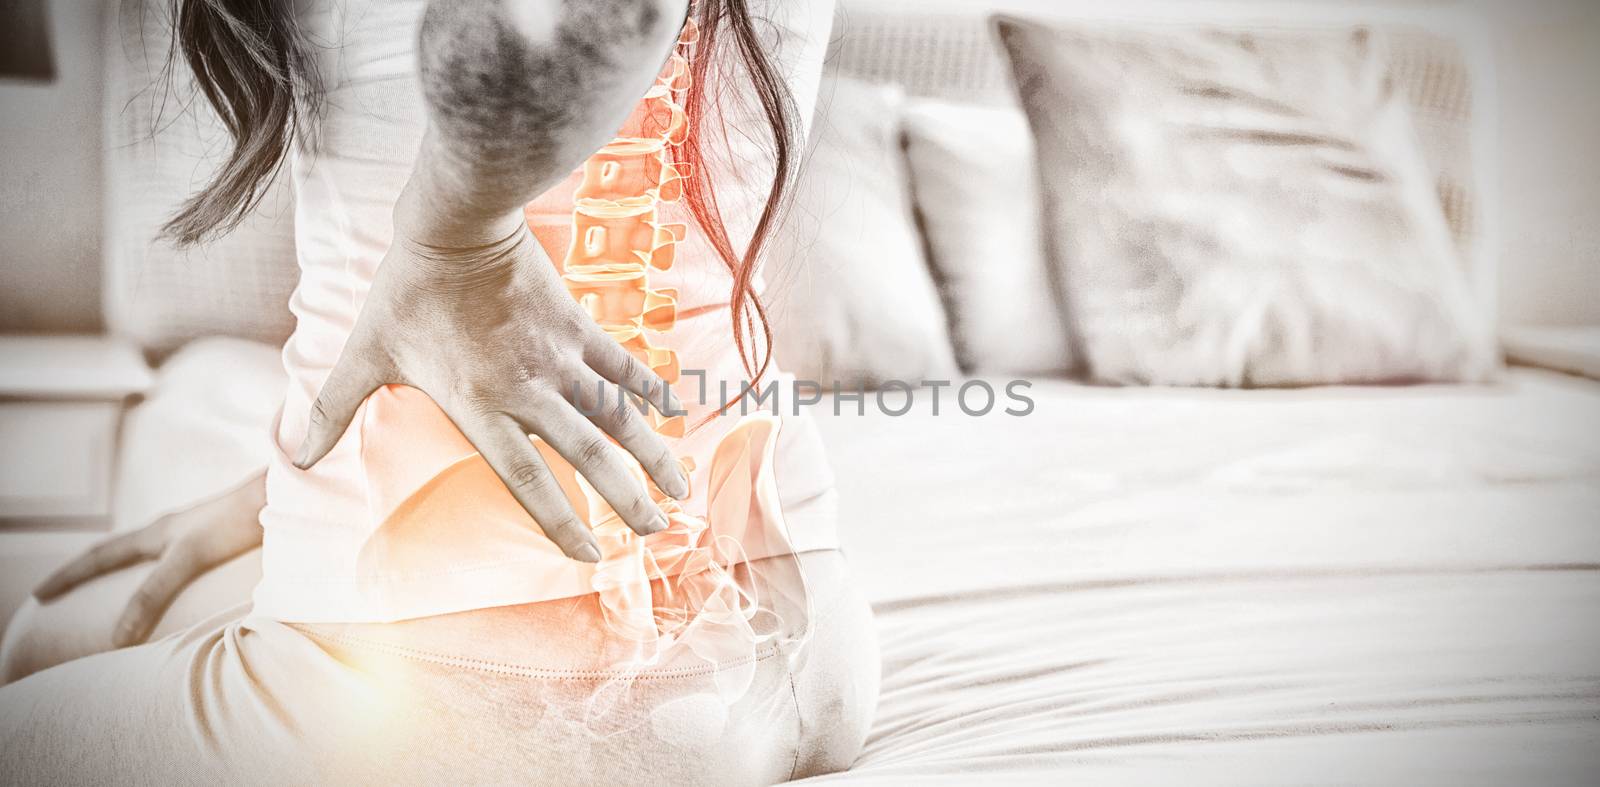 Digital composite of highlighted spine of woman with back pain by Wavebreakmedia